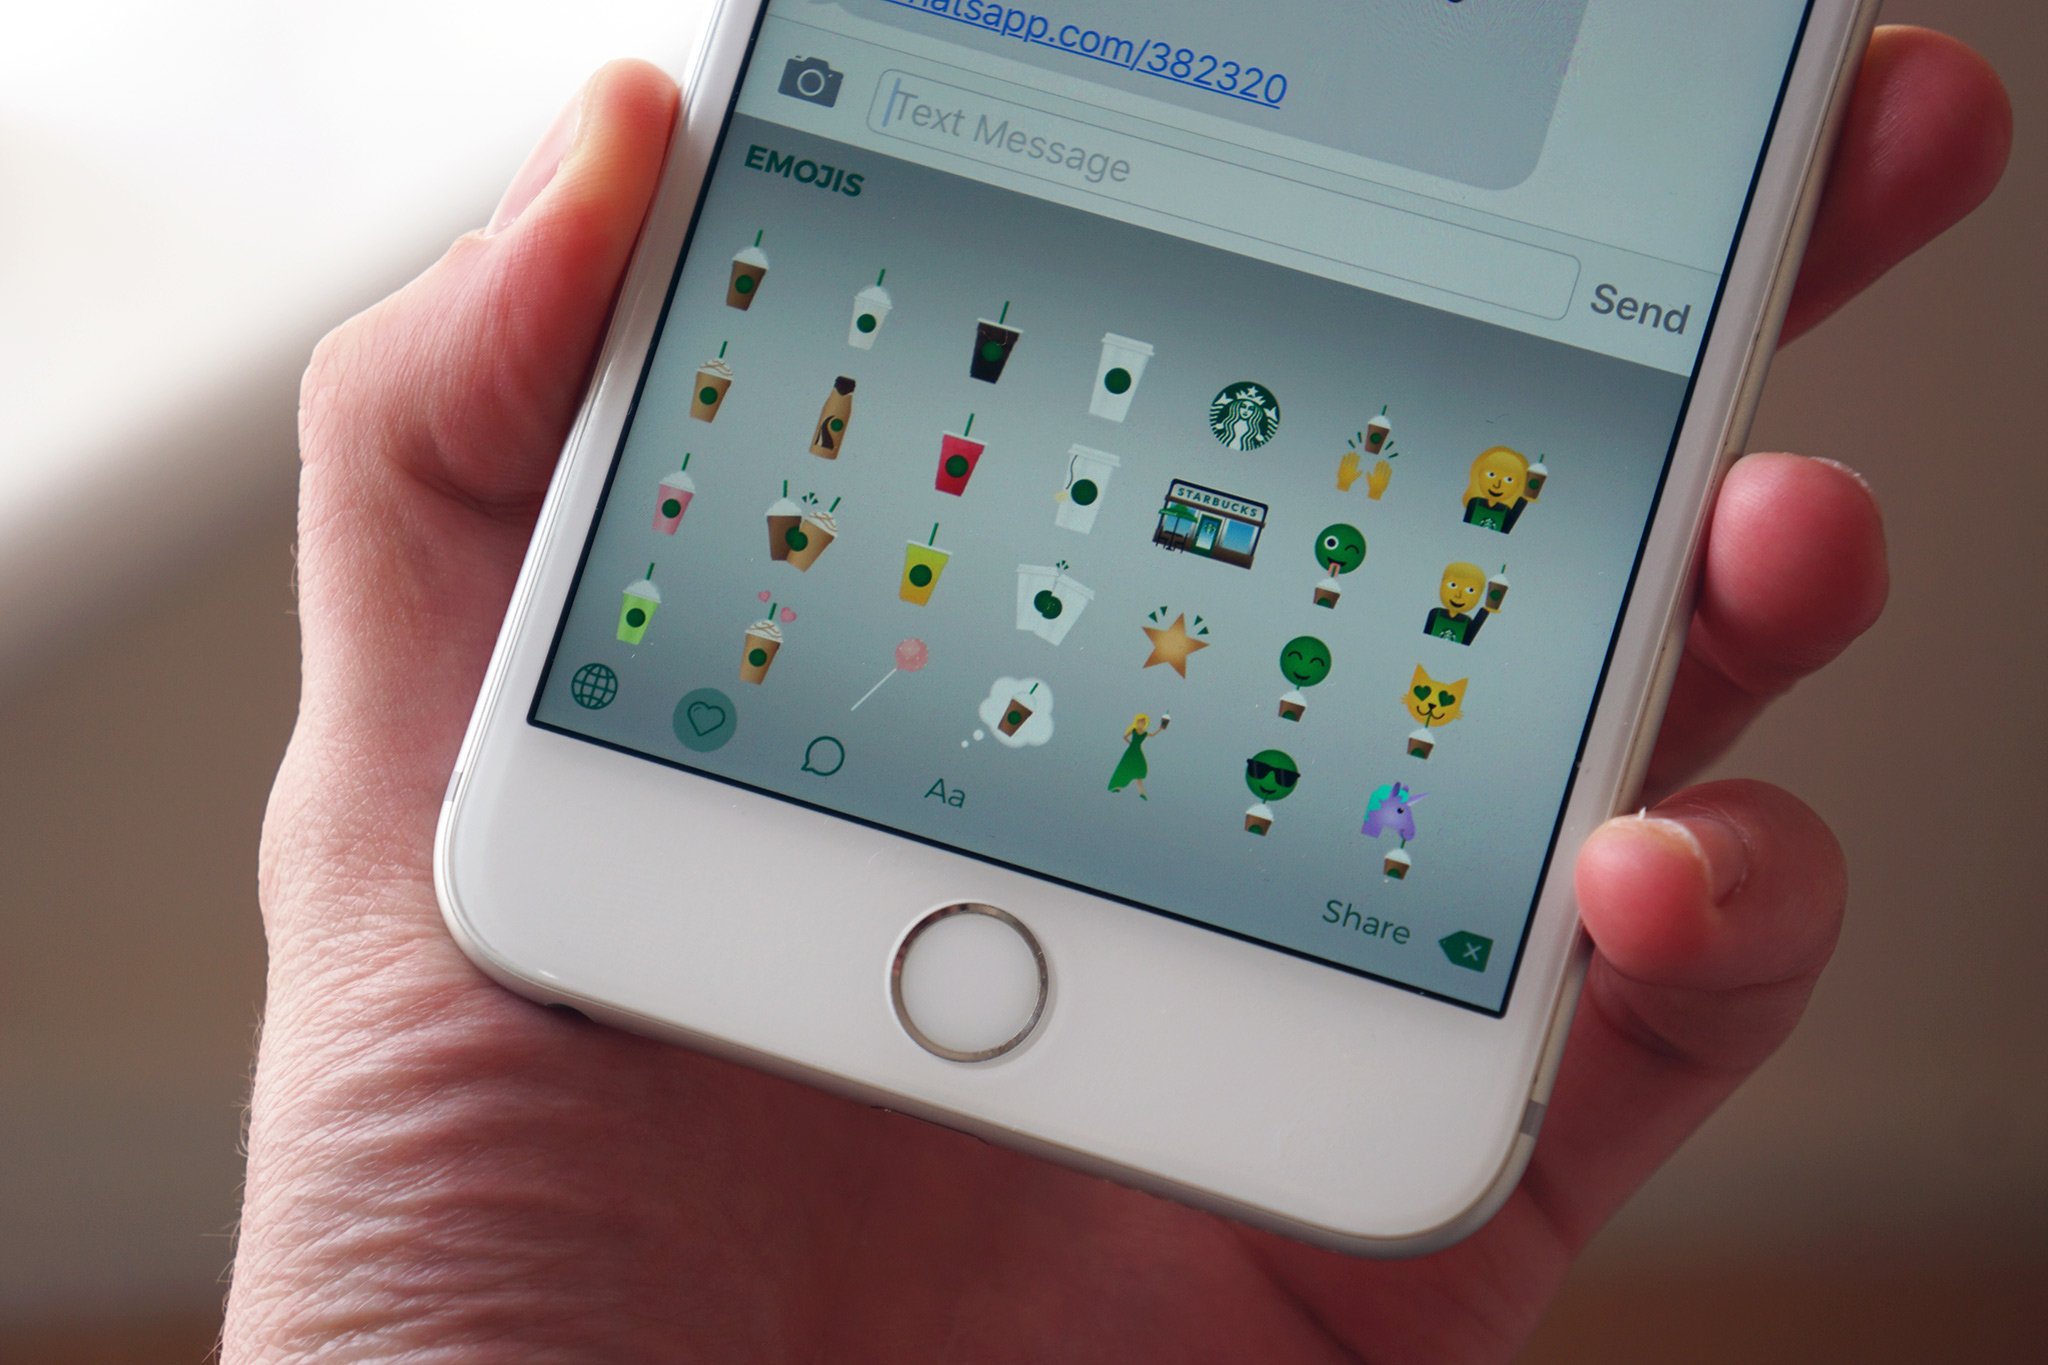 say-it-with-a-starbucks-emoji-thanks-to-new-keyboard-app